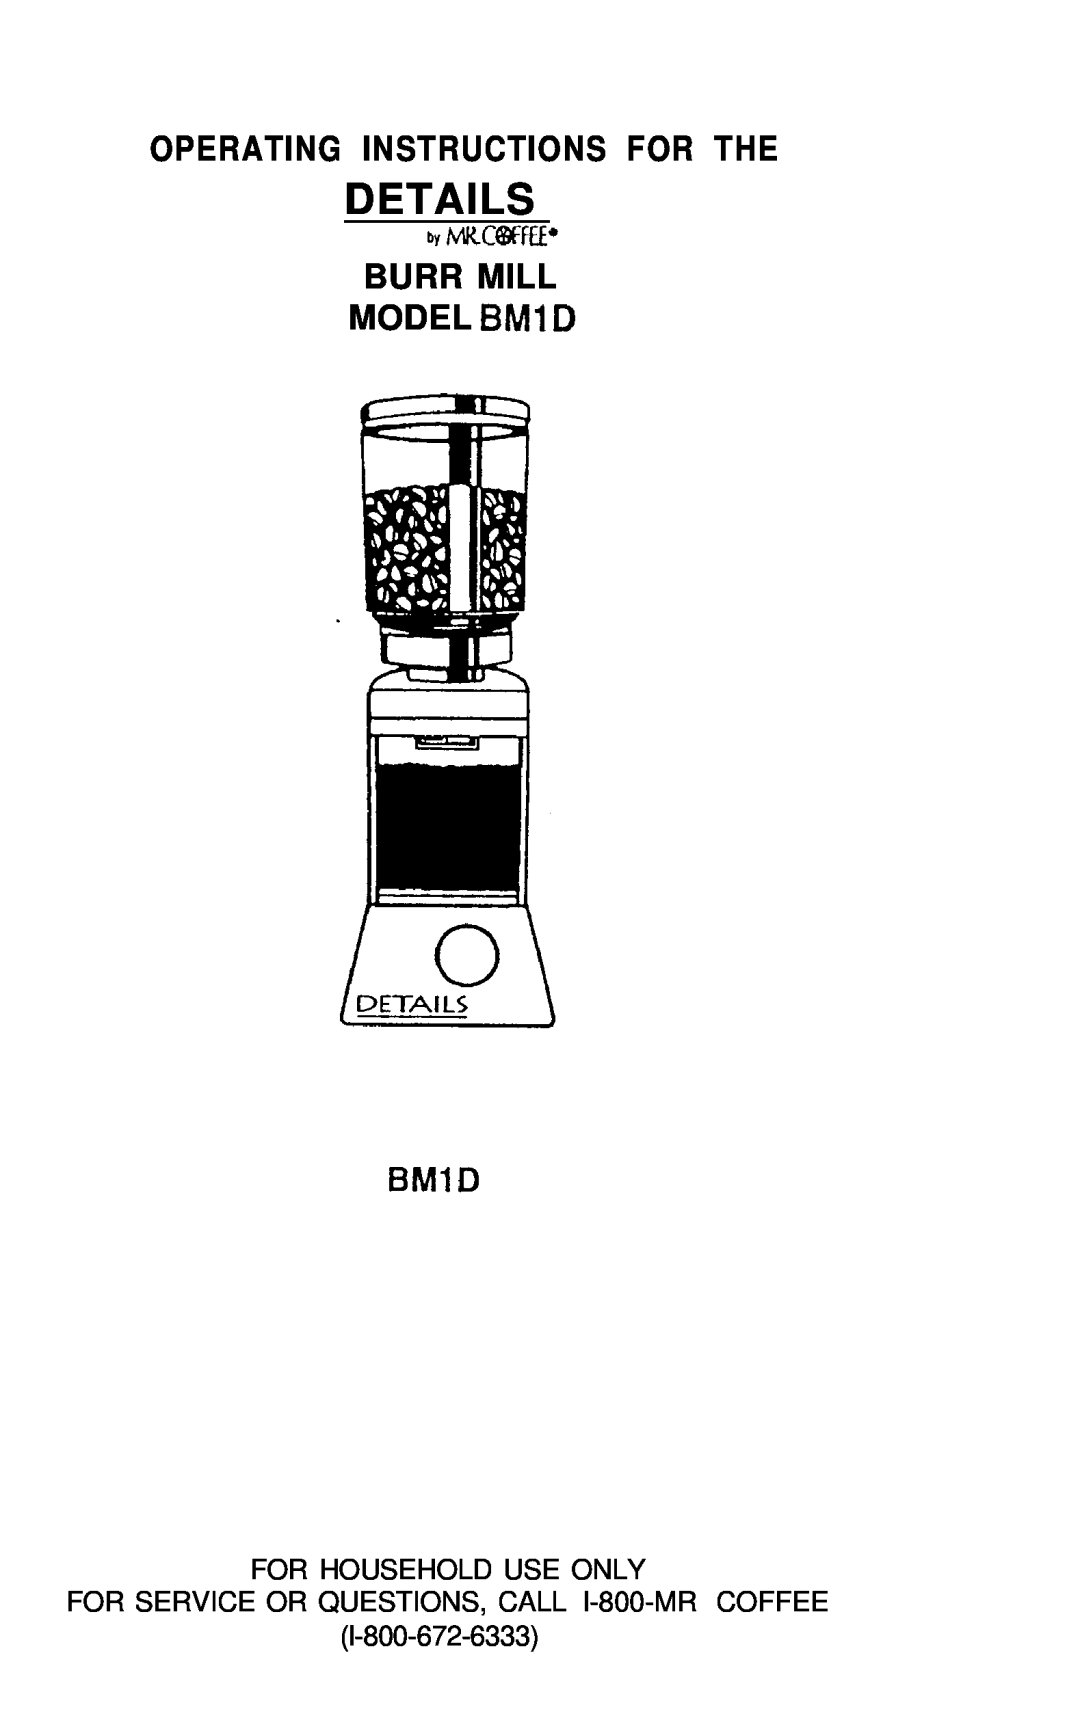 Mr. Coffee BMLD manual Operating Instructions For The, BURR MILL MODEL BMlD BMlD, For Household Use Only 